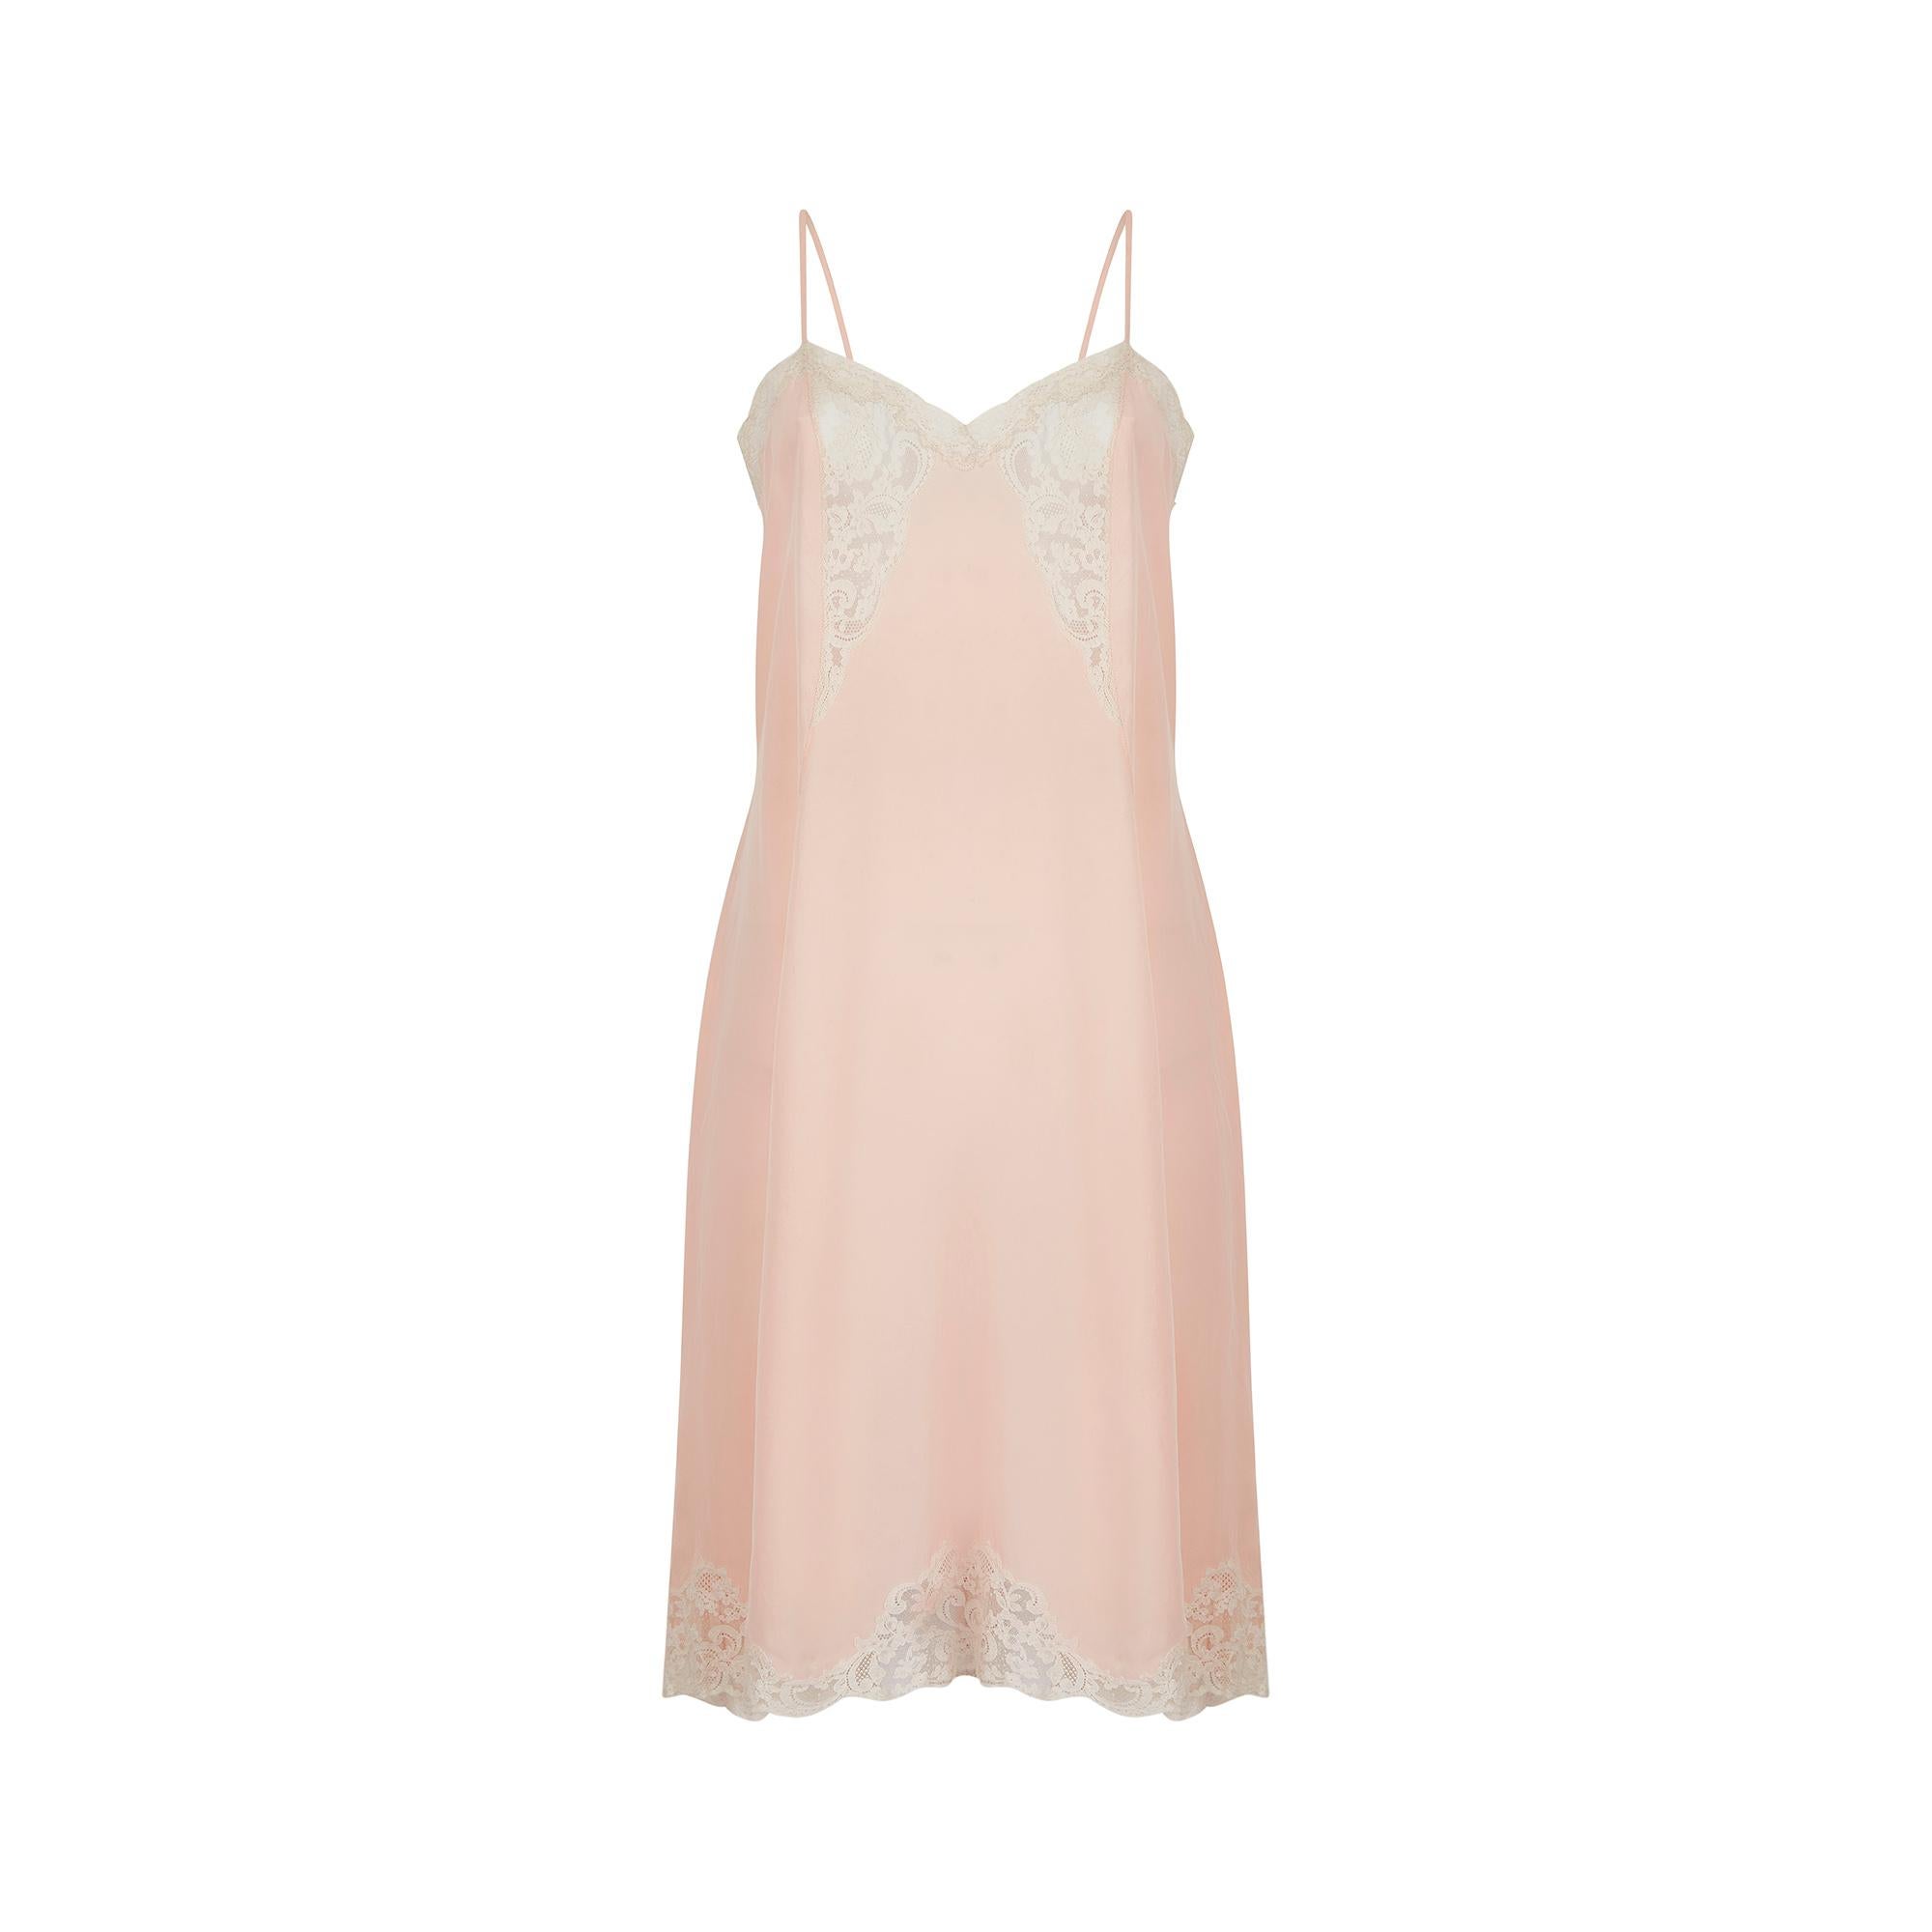 This peachy pink silk late 1930s slip dress has the most beautiful lace insert detail to the bust and on the hem. It is cut in a very classic style, loose and flowing, with a slightly wider shape at the hip for a feminine silhouette. The bust is